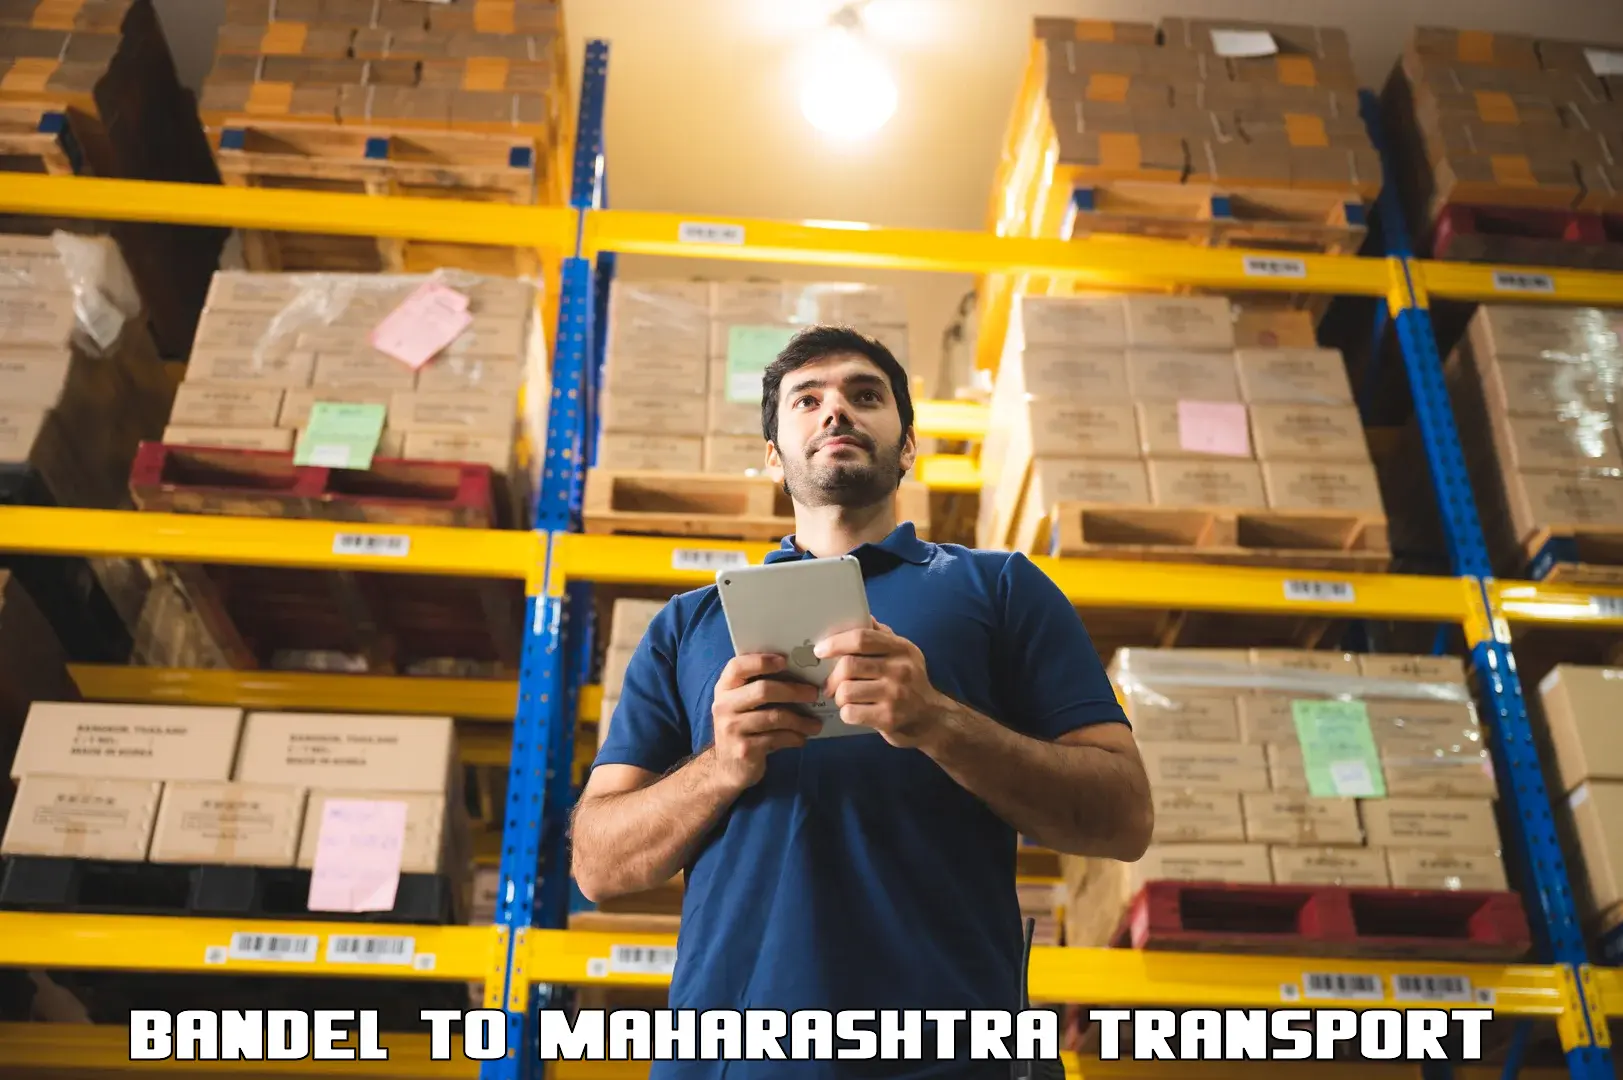 Commercial transport service Bandel to Thane